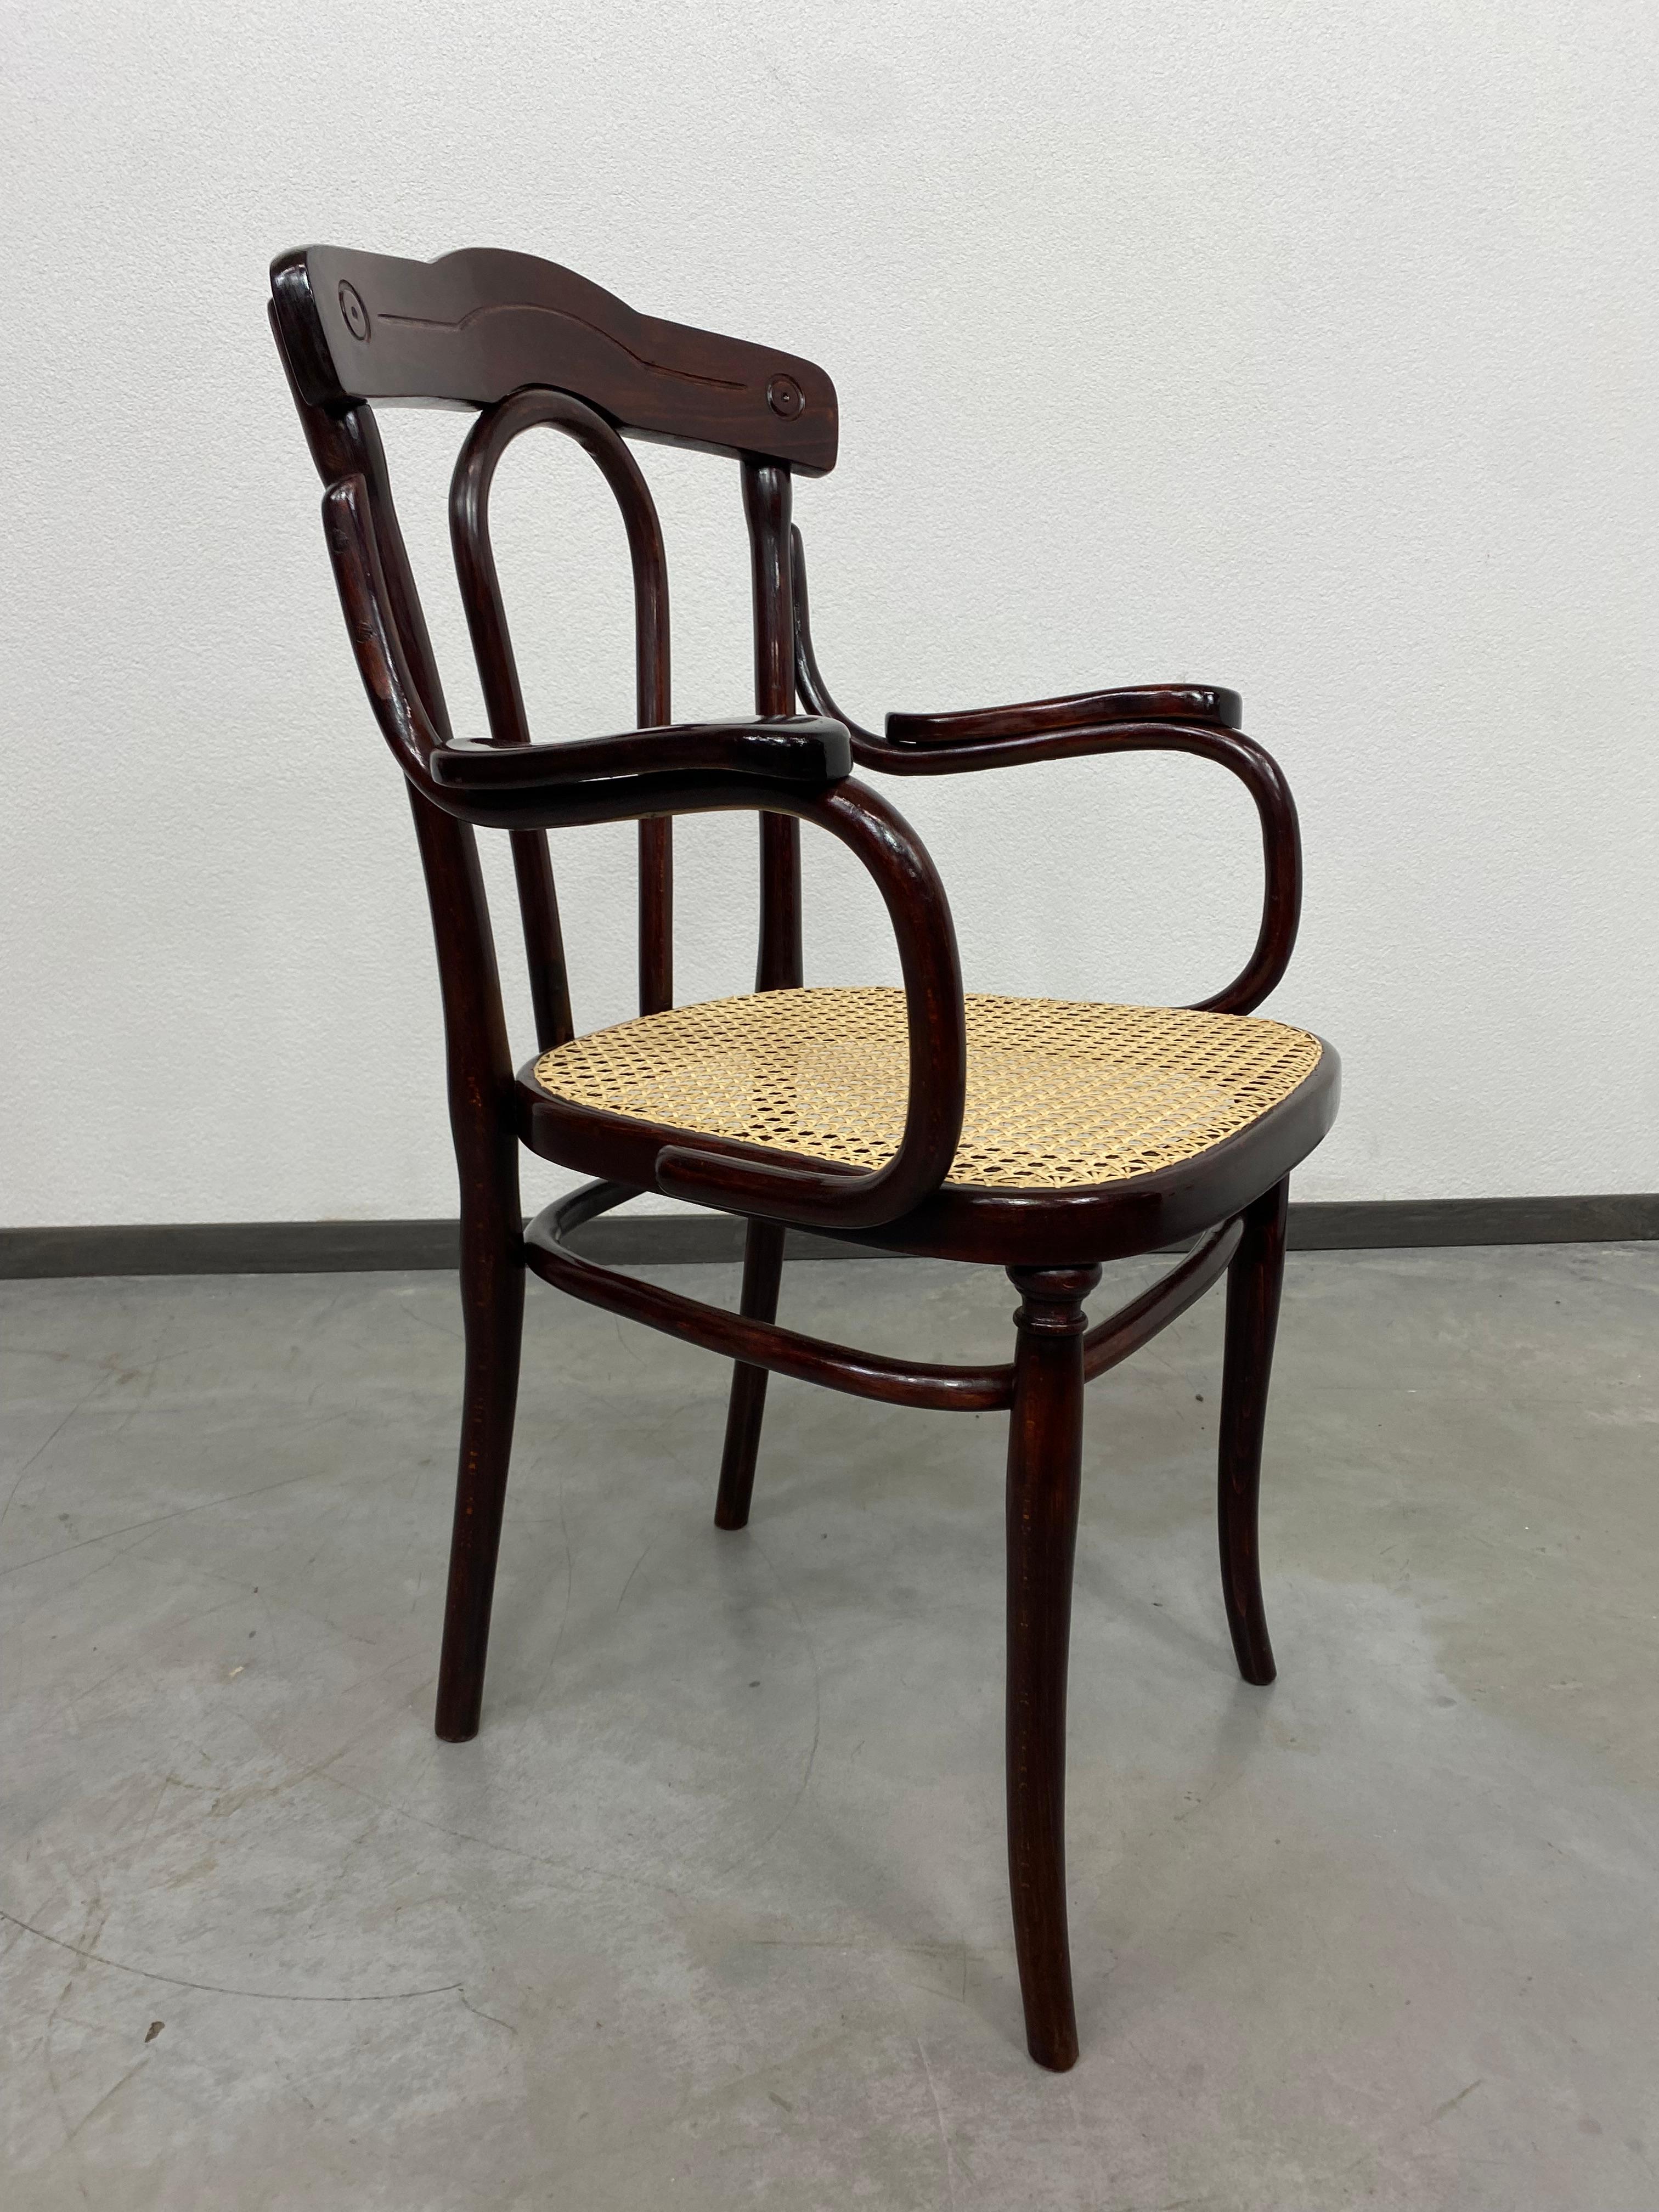 Thonet office chair with rattan seat professionally stained and repolished, new handmade rattan seat.